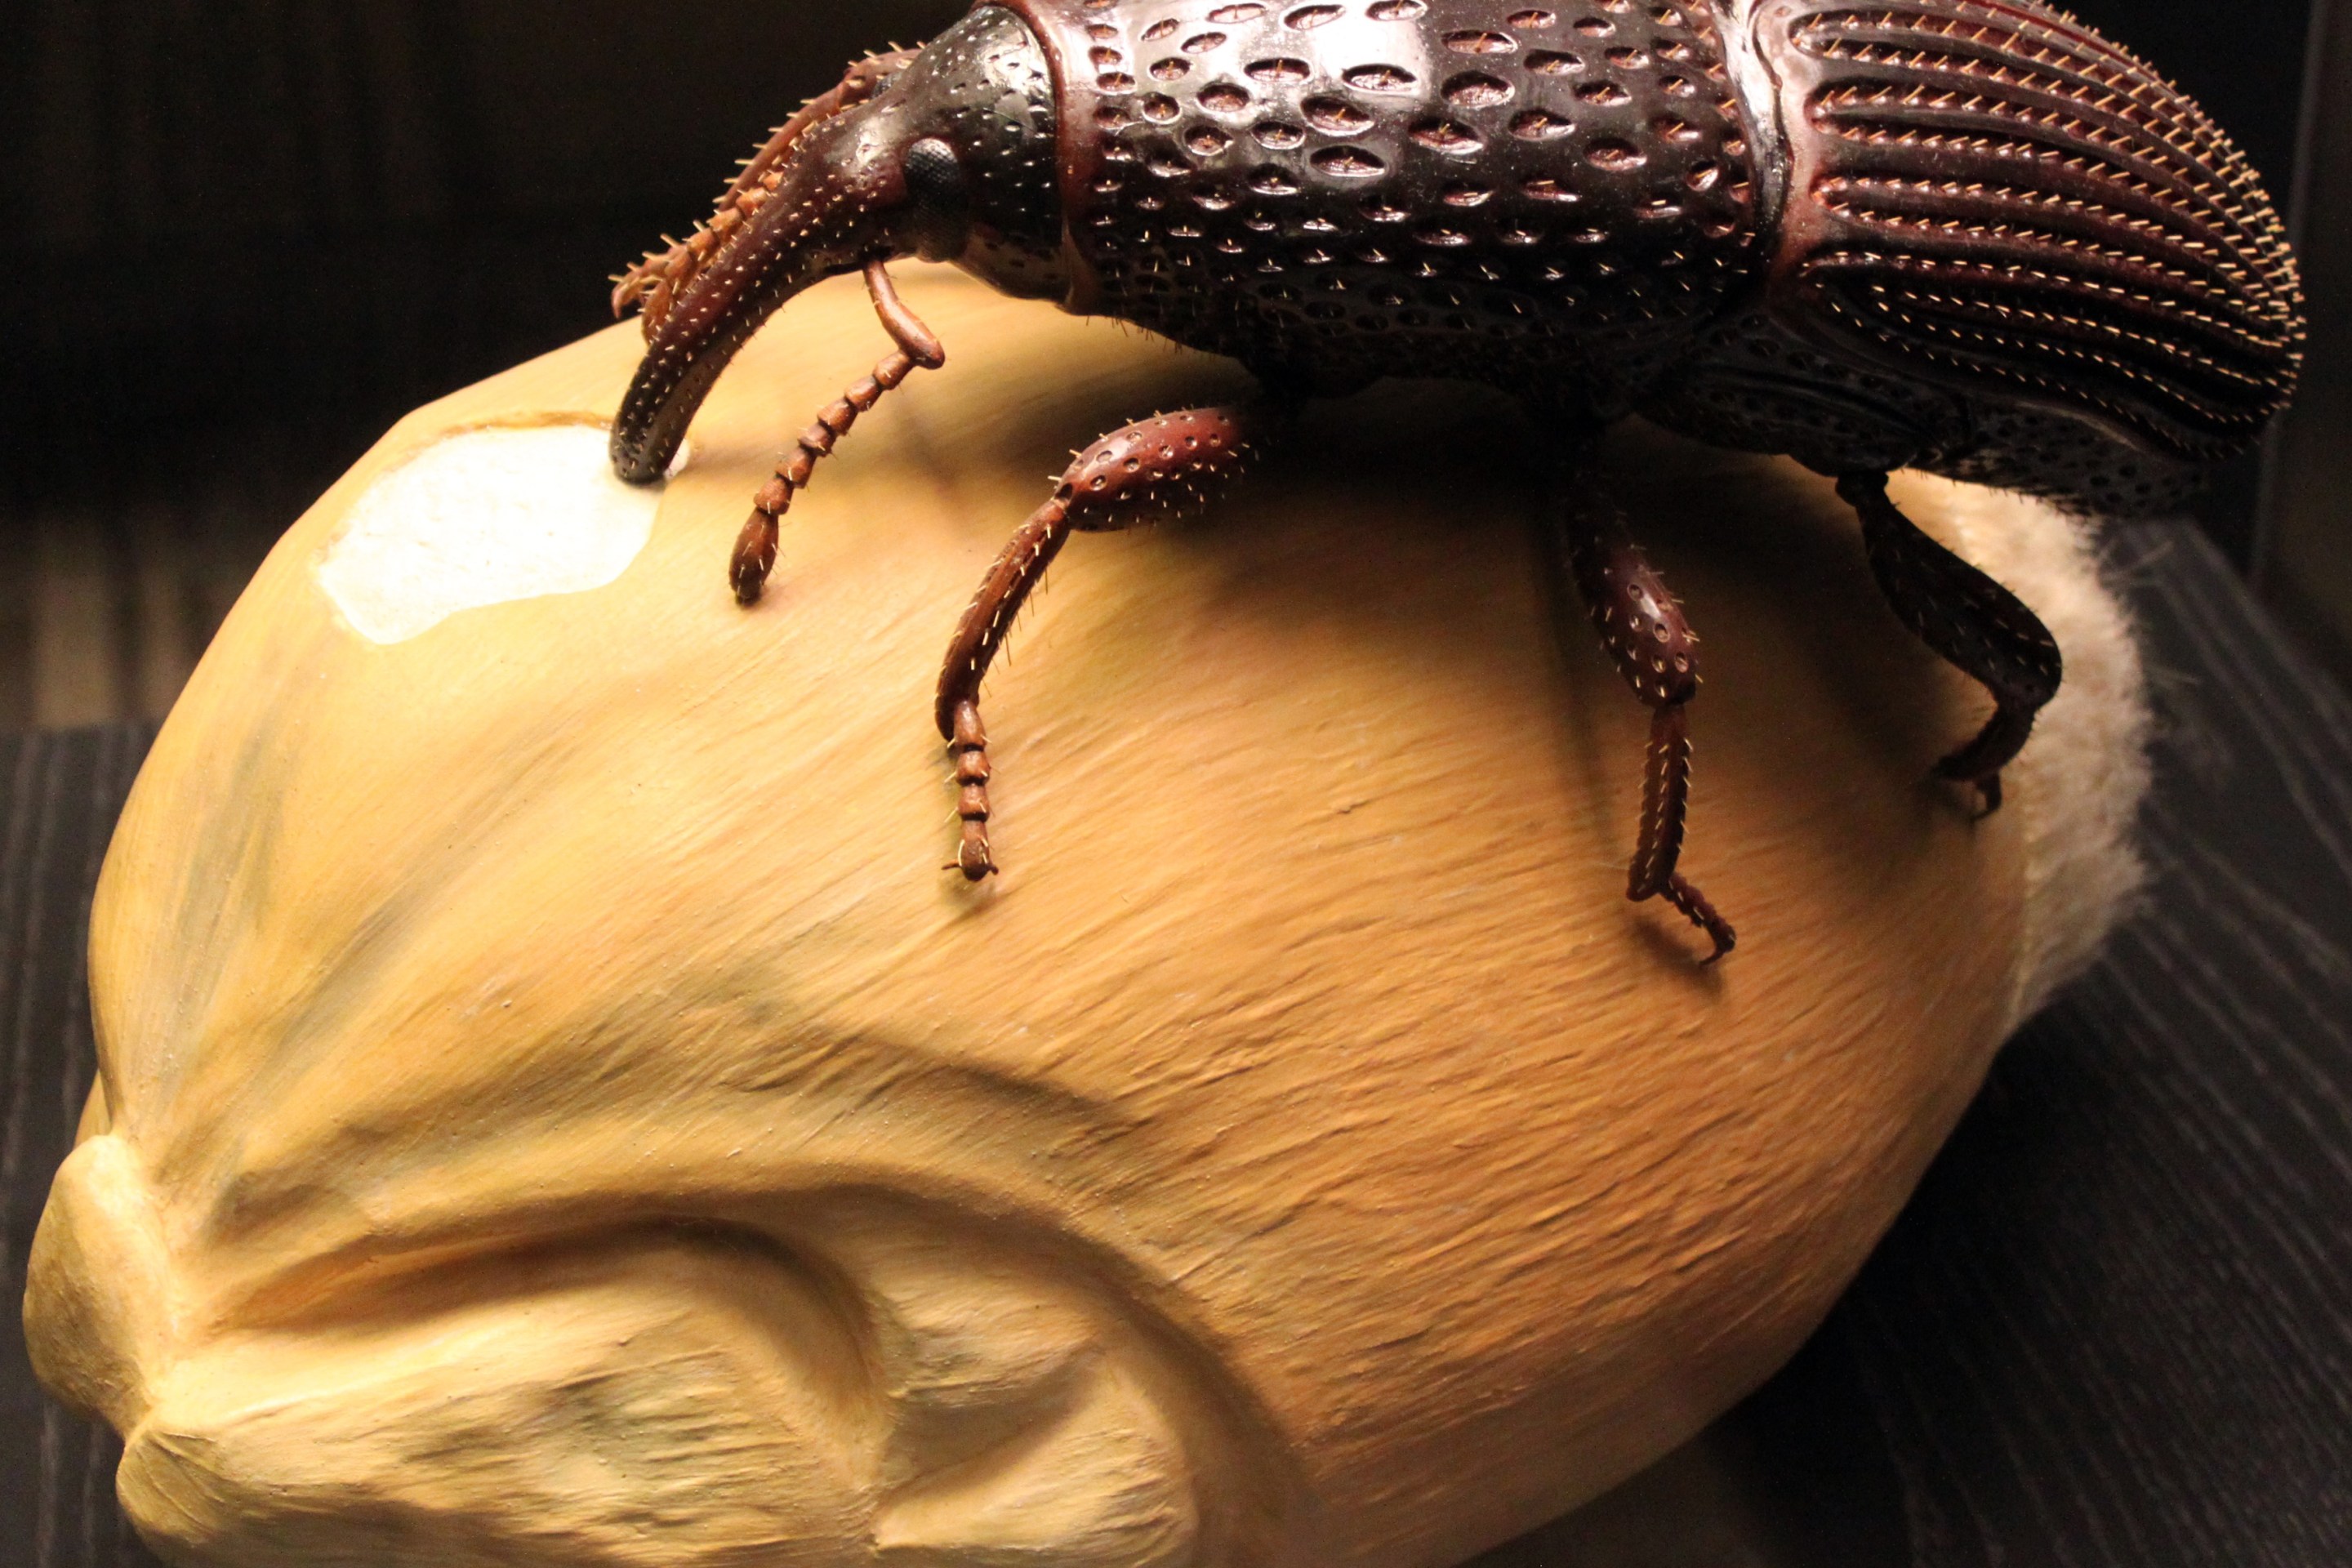 A model of a brown grain weevil resting on a grain.